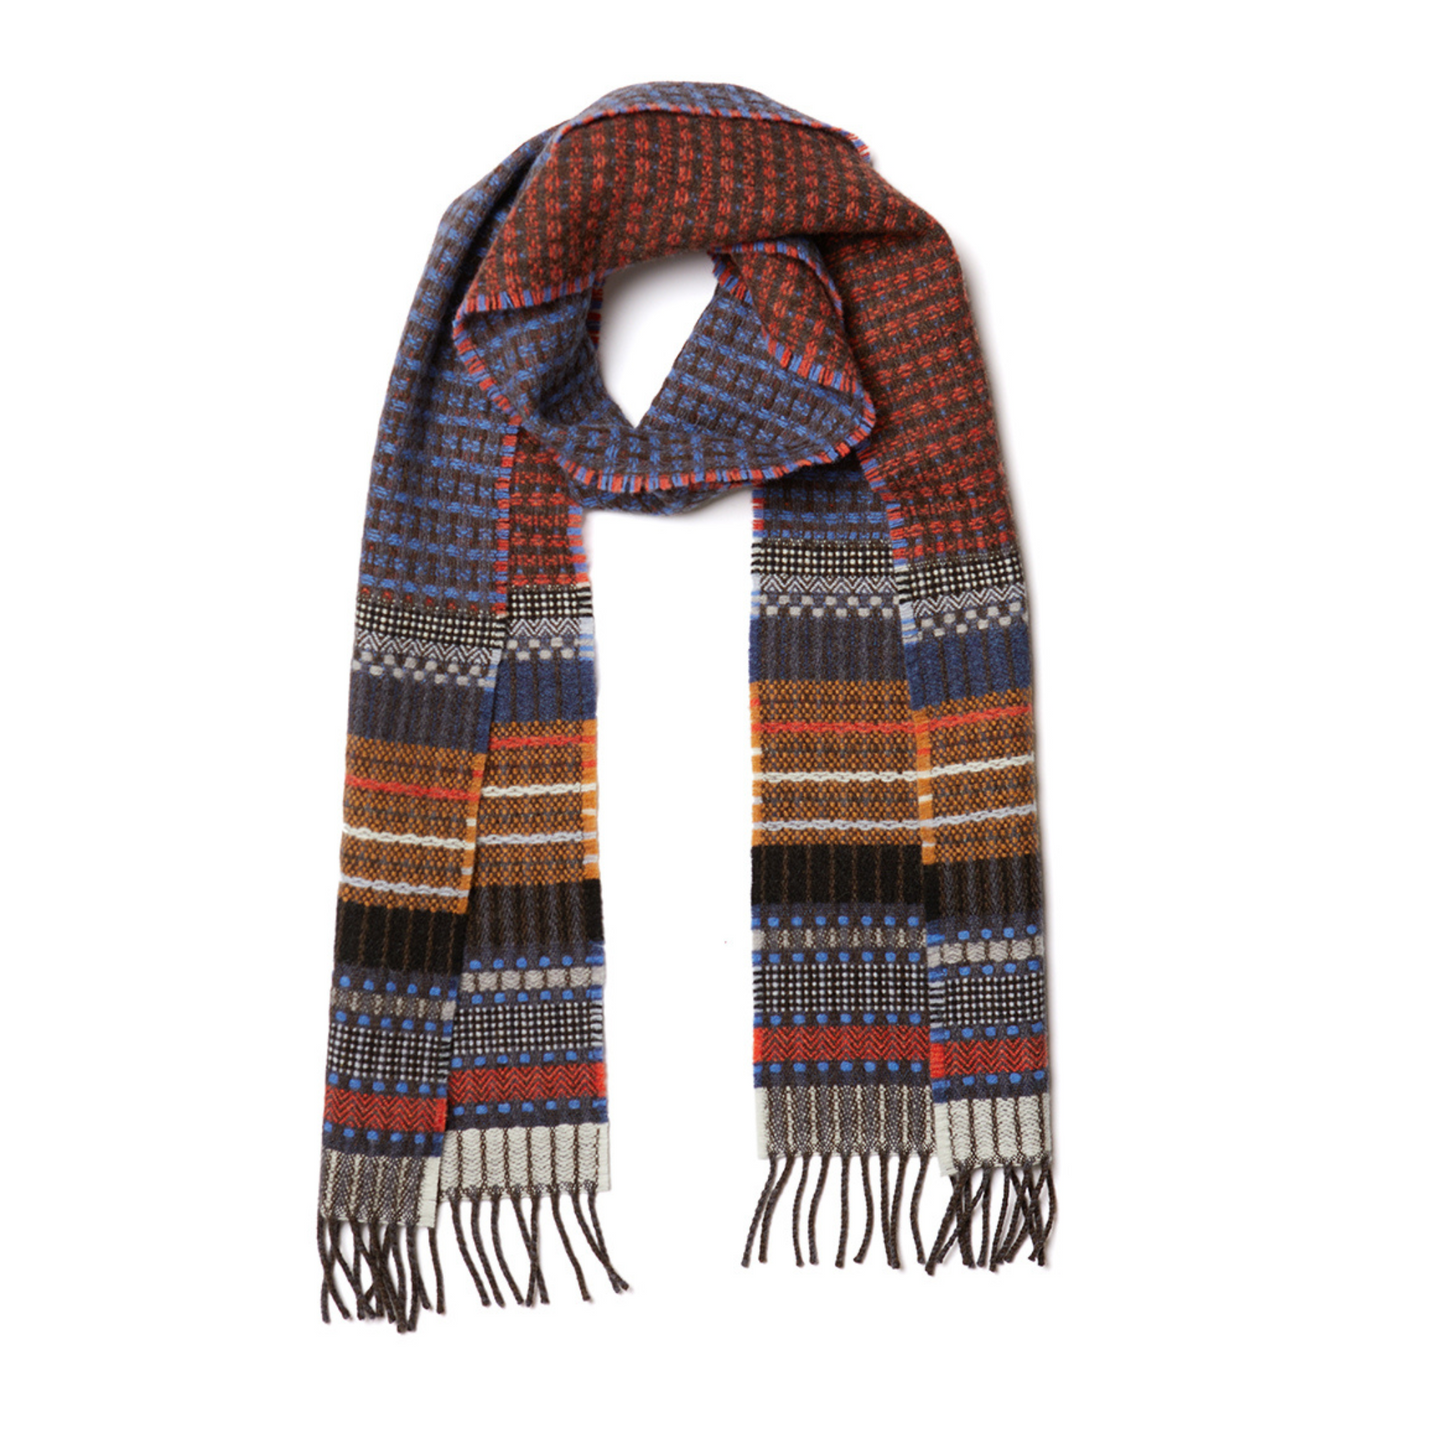 stripe and block pattern merino wool scarf in denim and red brown